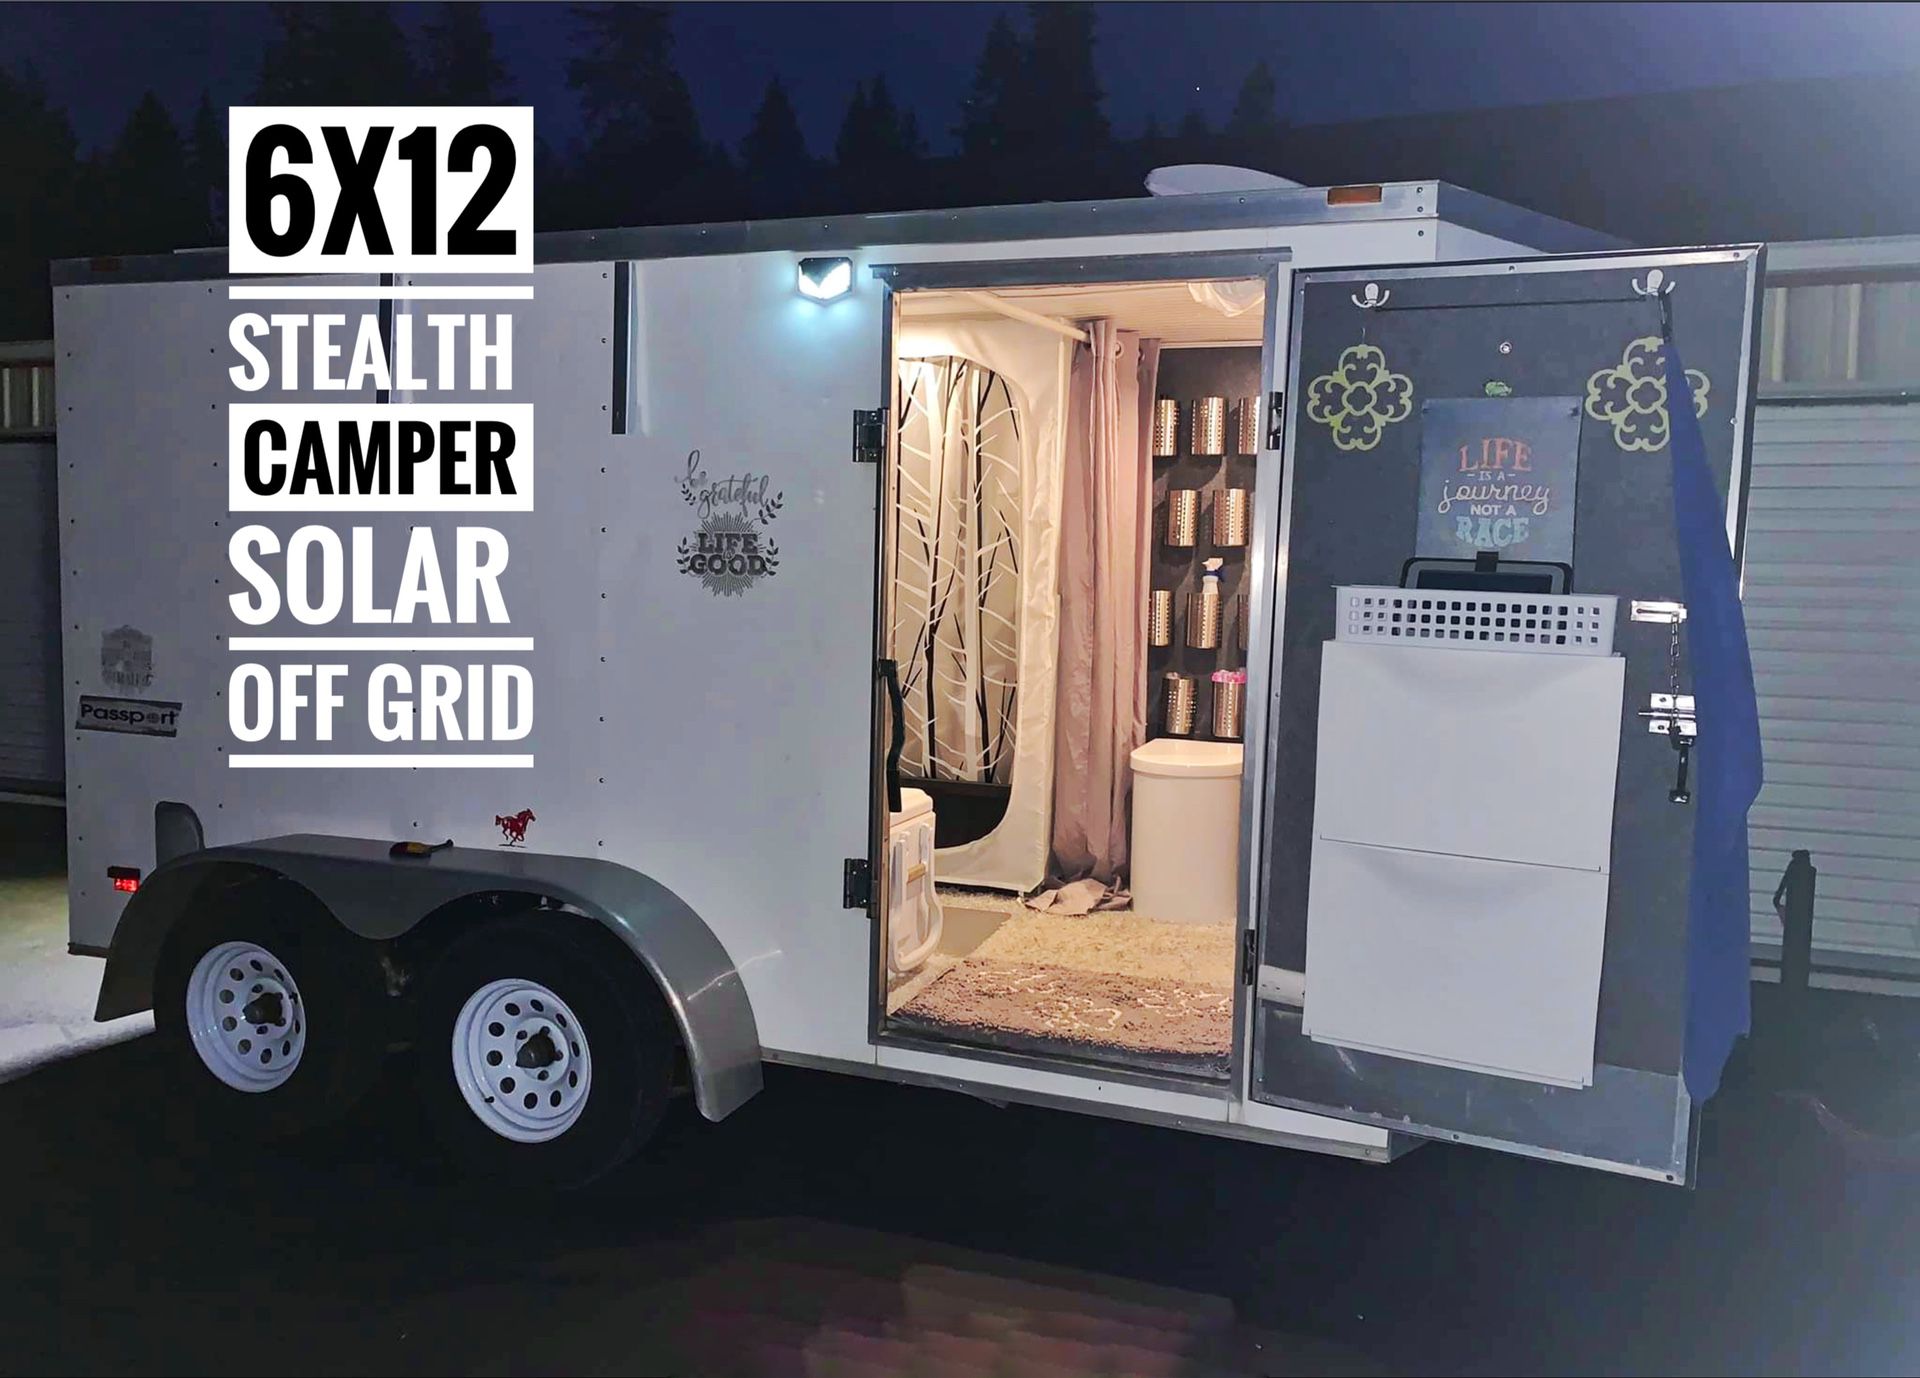 Photo Fully Solar OffGrid Stealth Cargo Trailer Camper Tiny Home